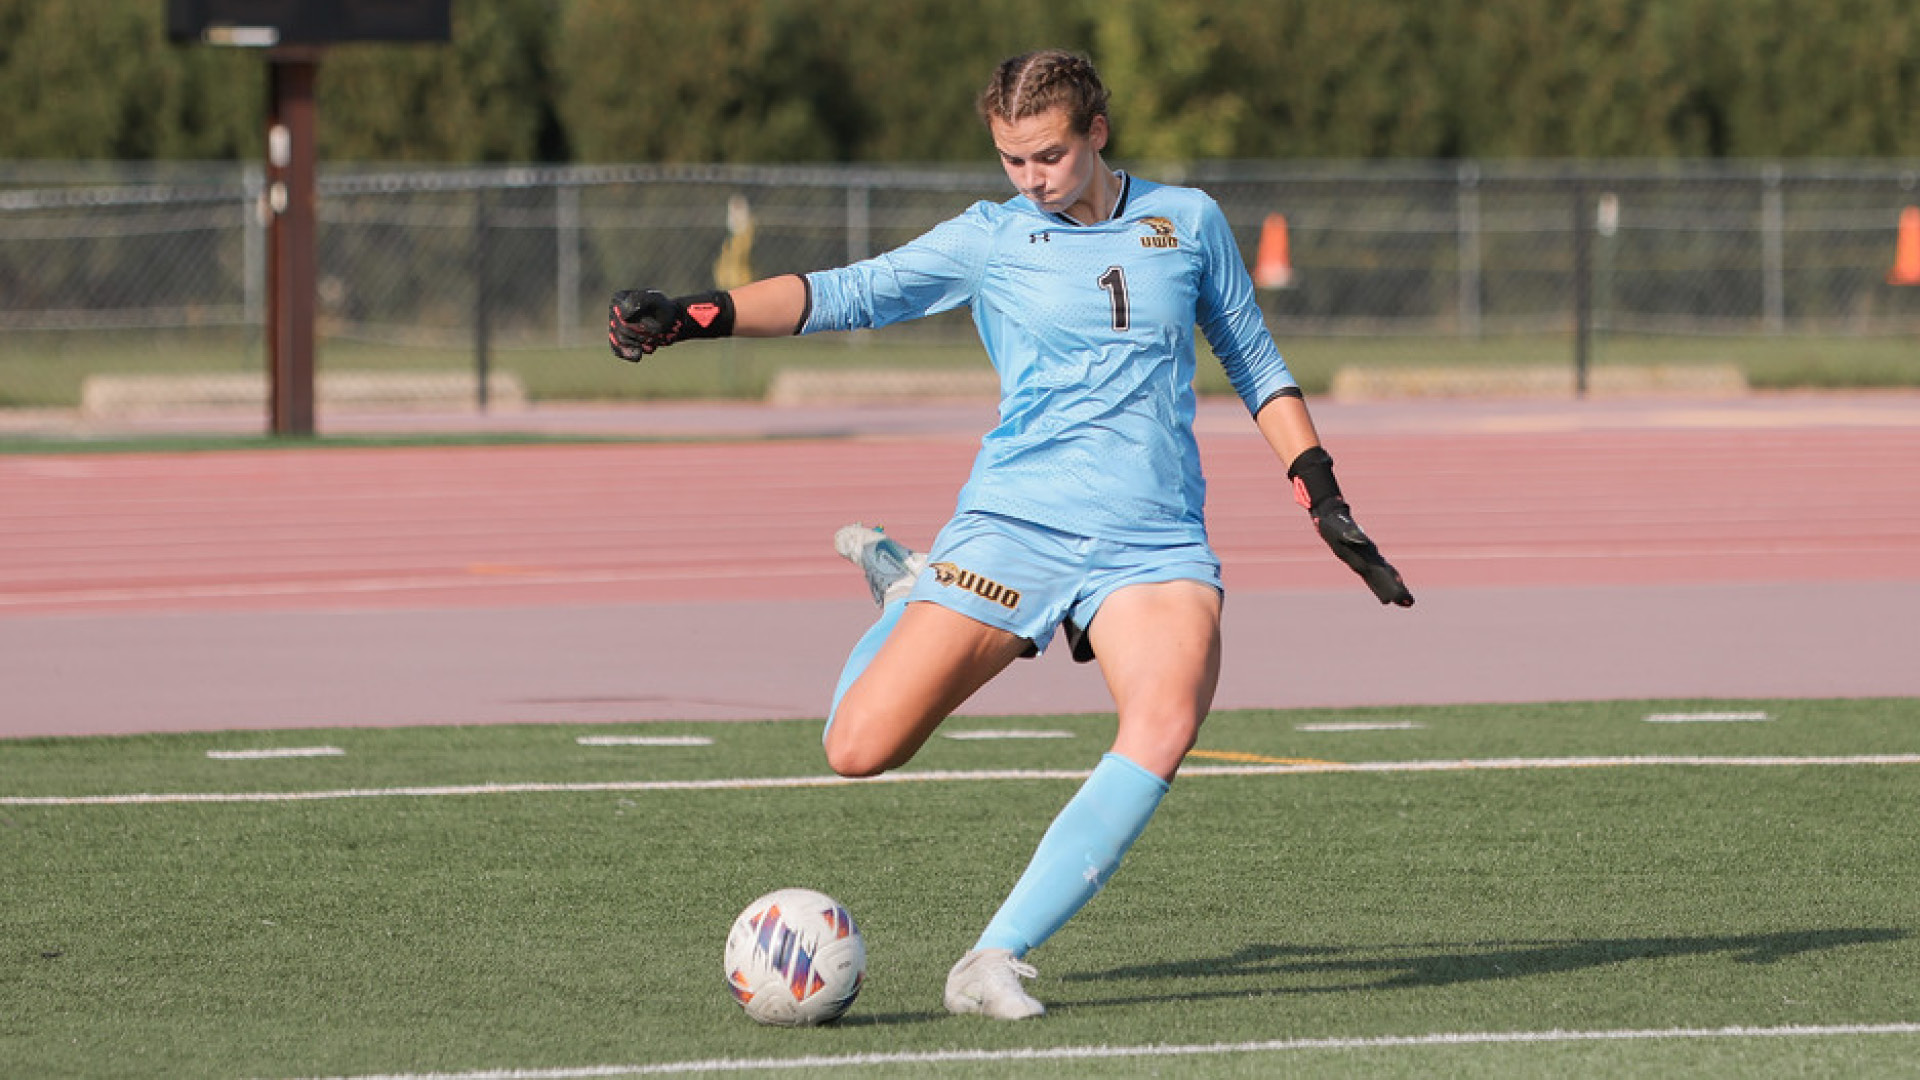 Emma Sauriol recorded six saves against Loras College on Wednesday afternoon